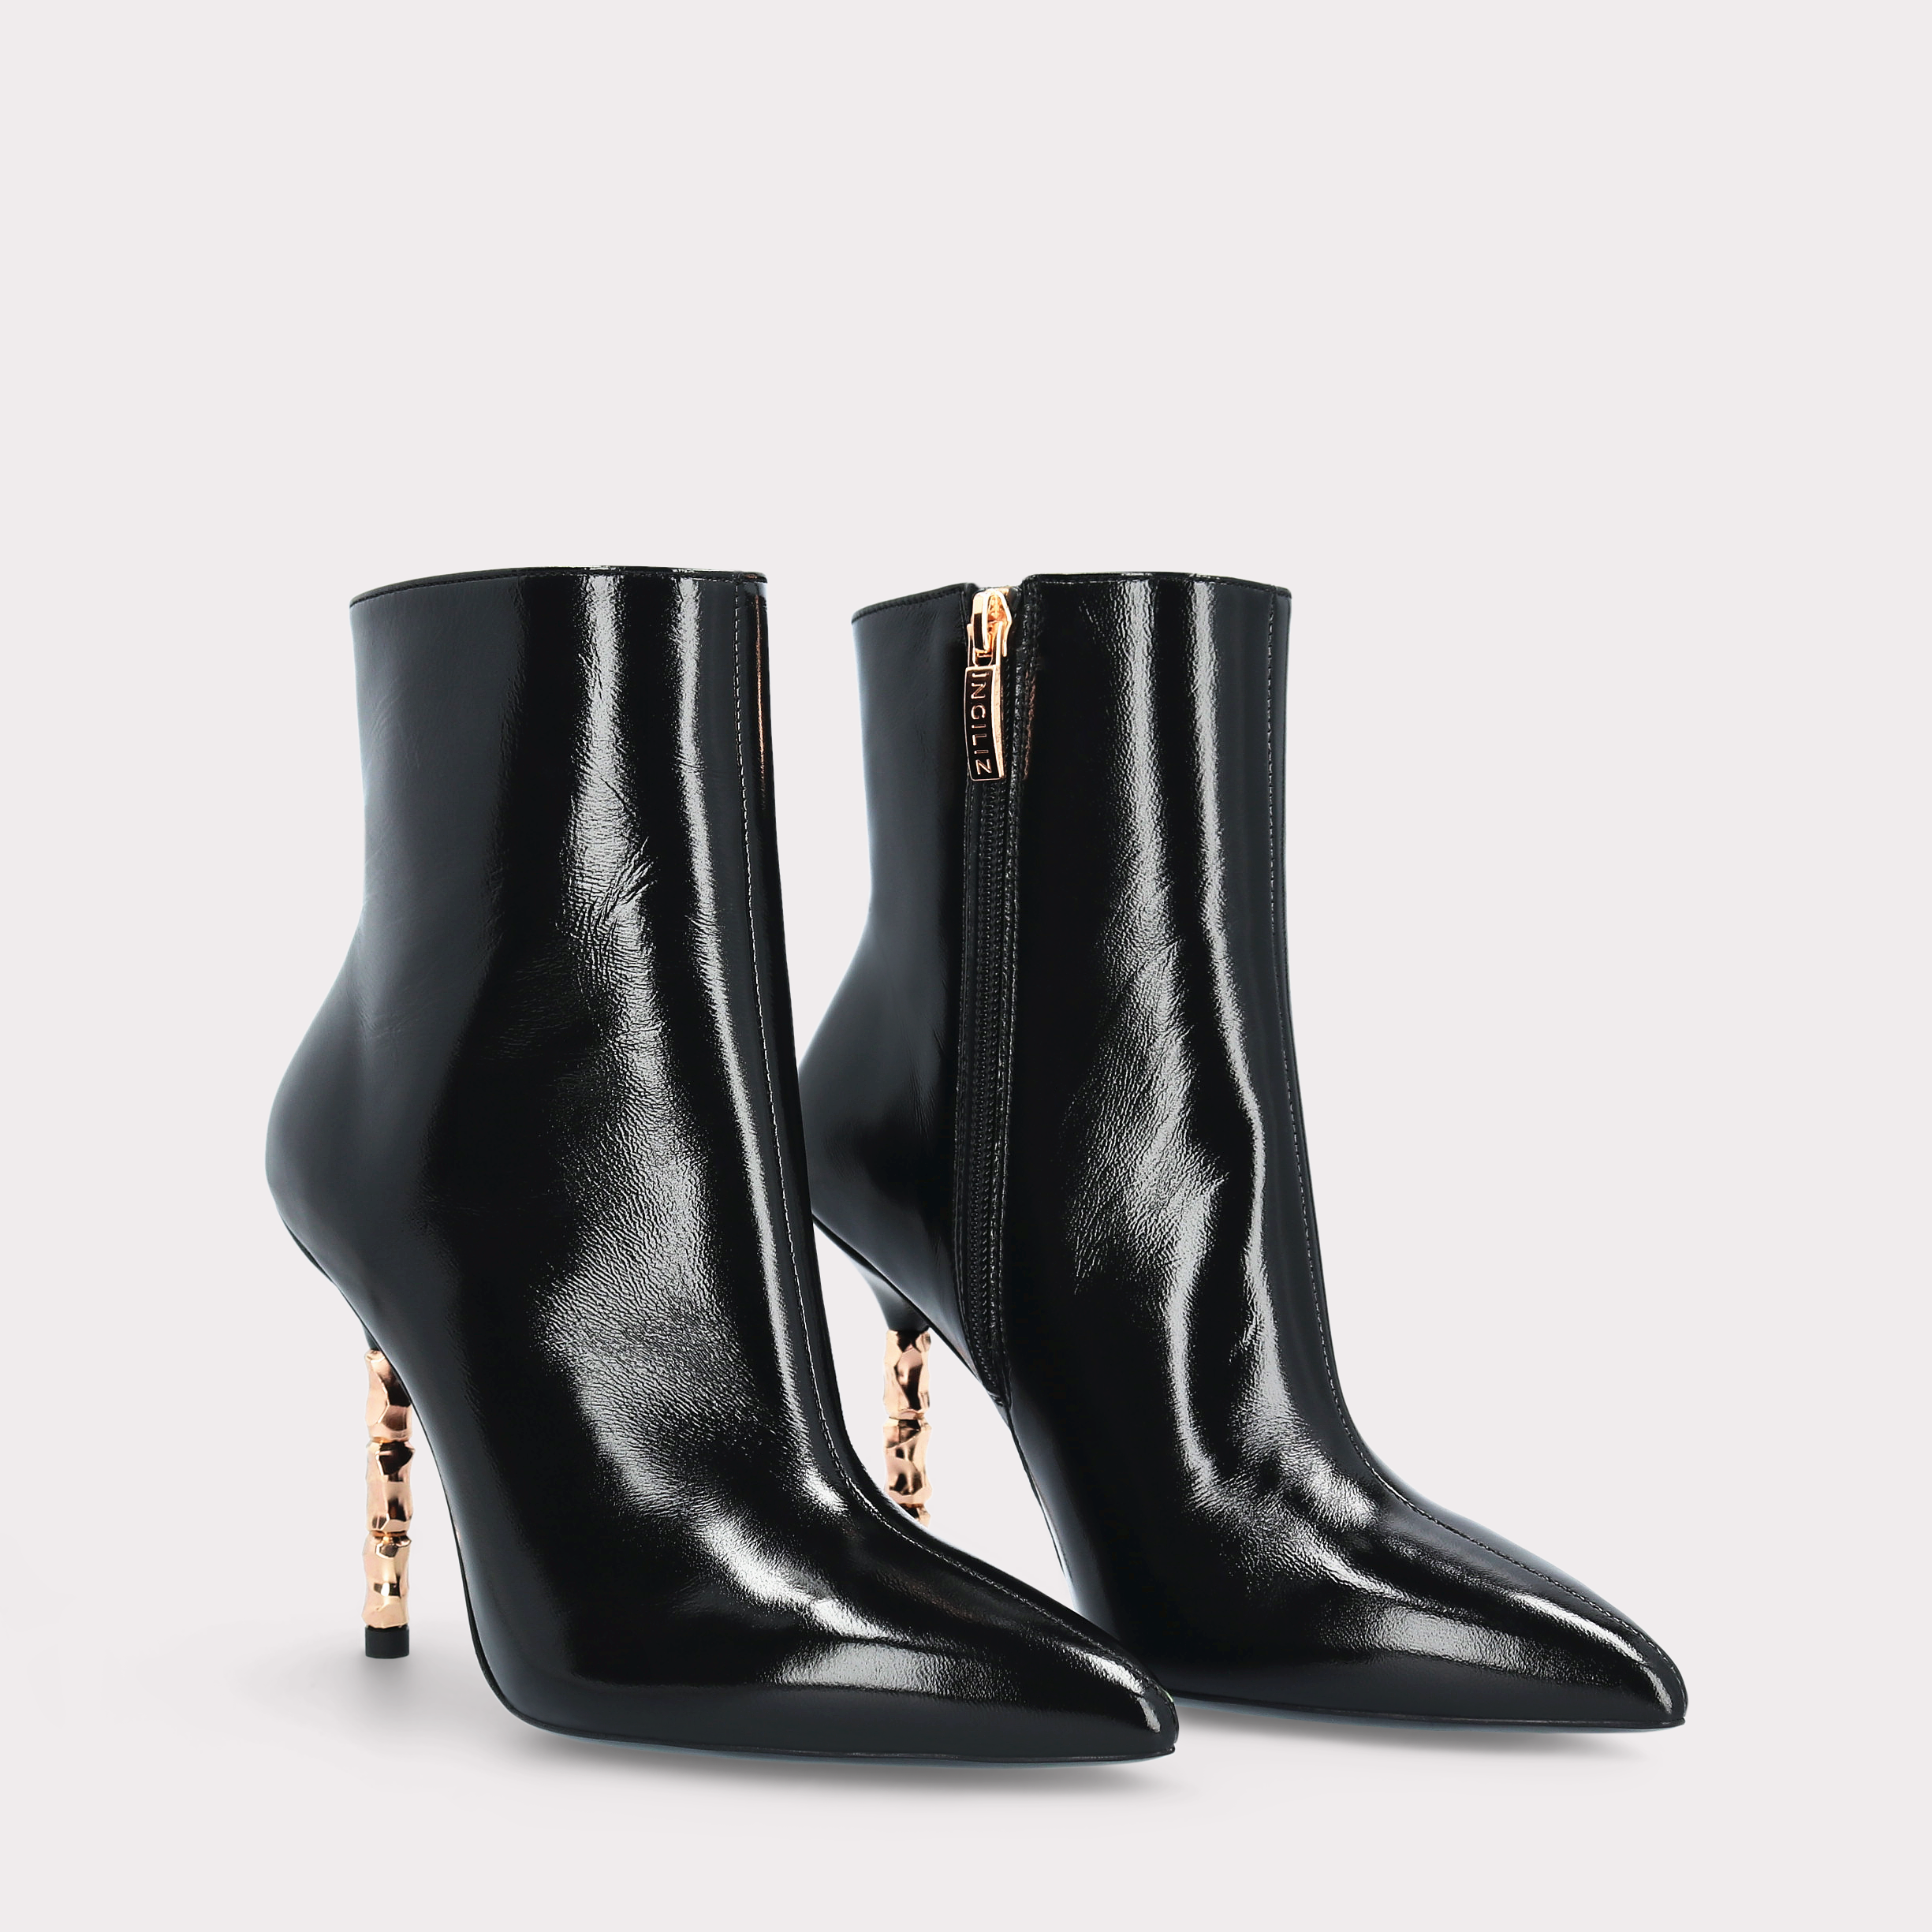 ASTRID ZIP BLACK GLOSS LEATHER ANKLE BOOTS